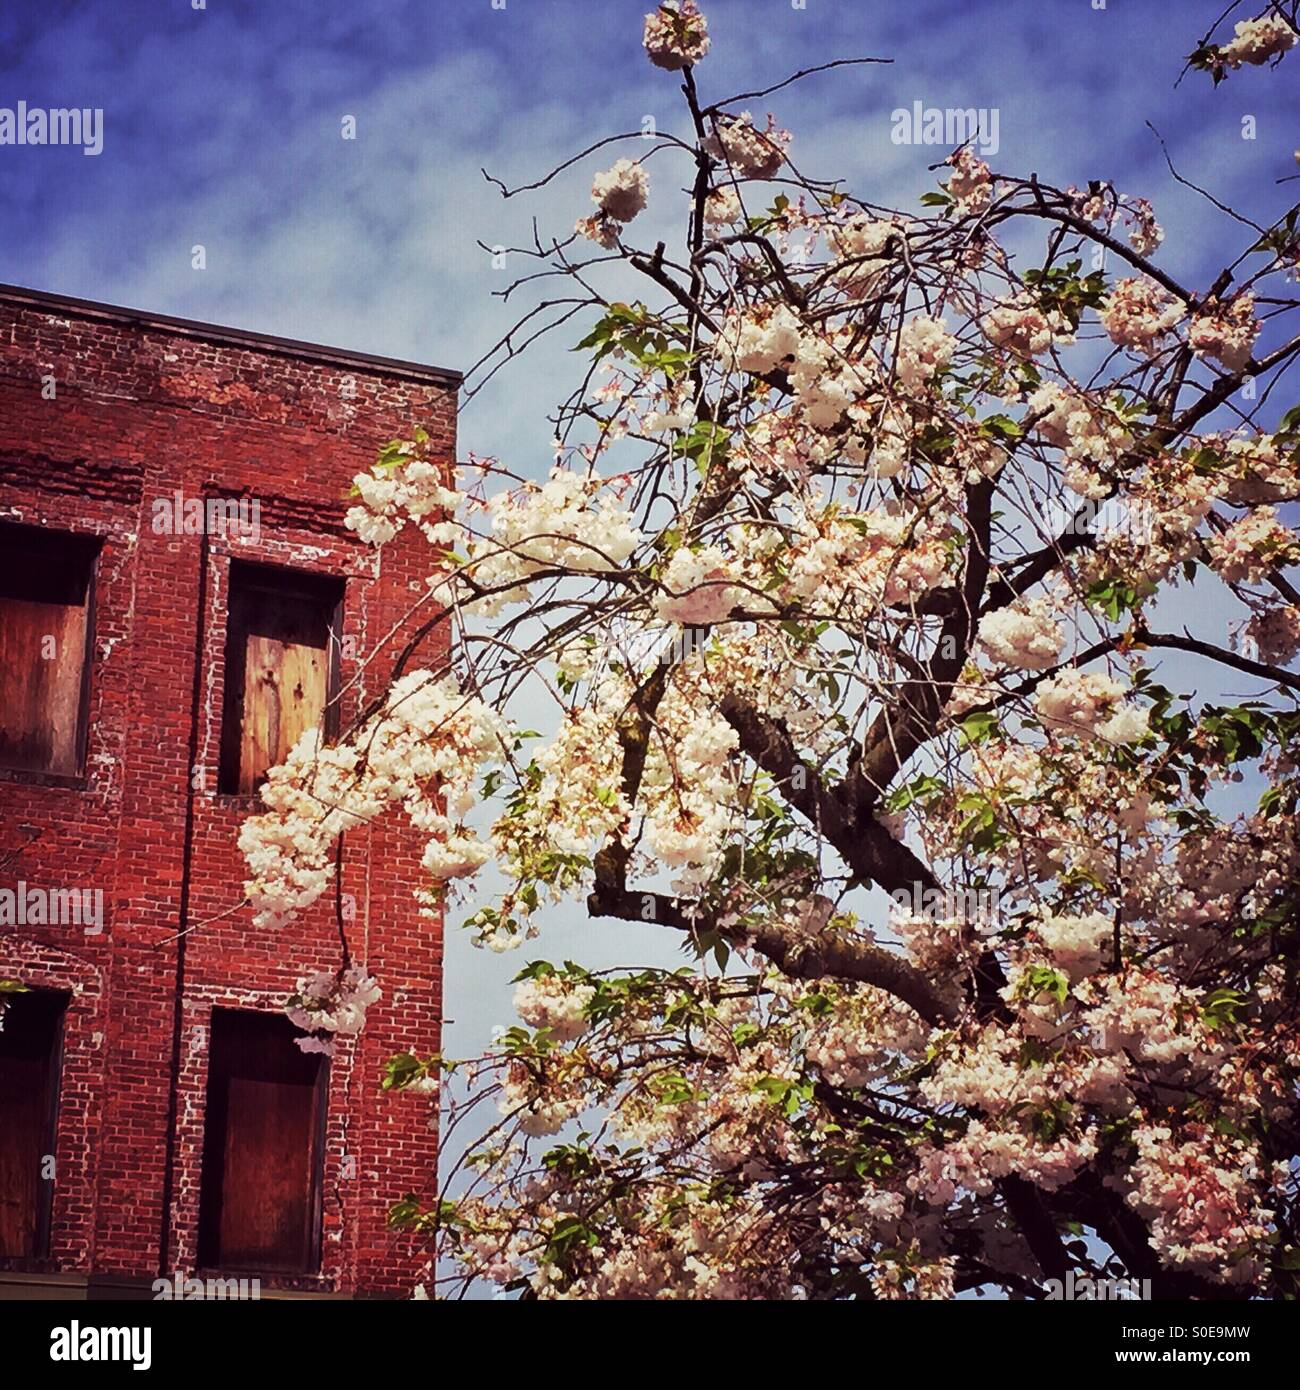 Contrasts between nature and architecture, new blossoms and worn brick make delightful visual companions in a city environment. Stock Photo